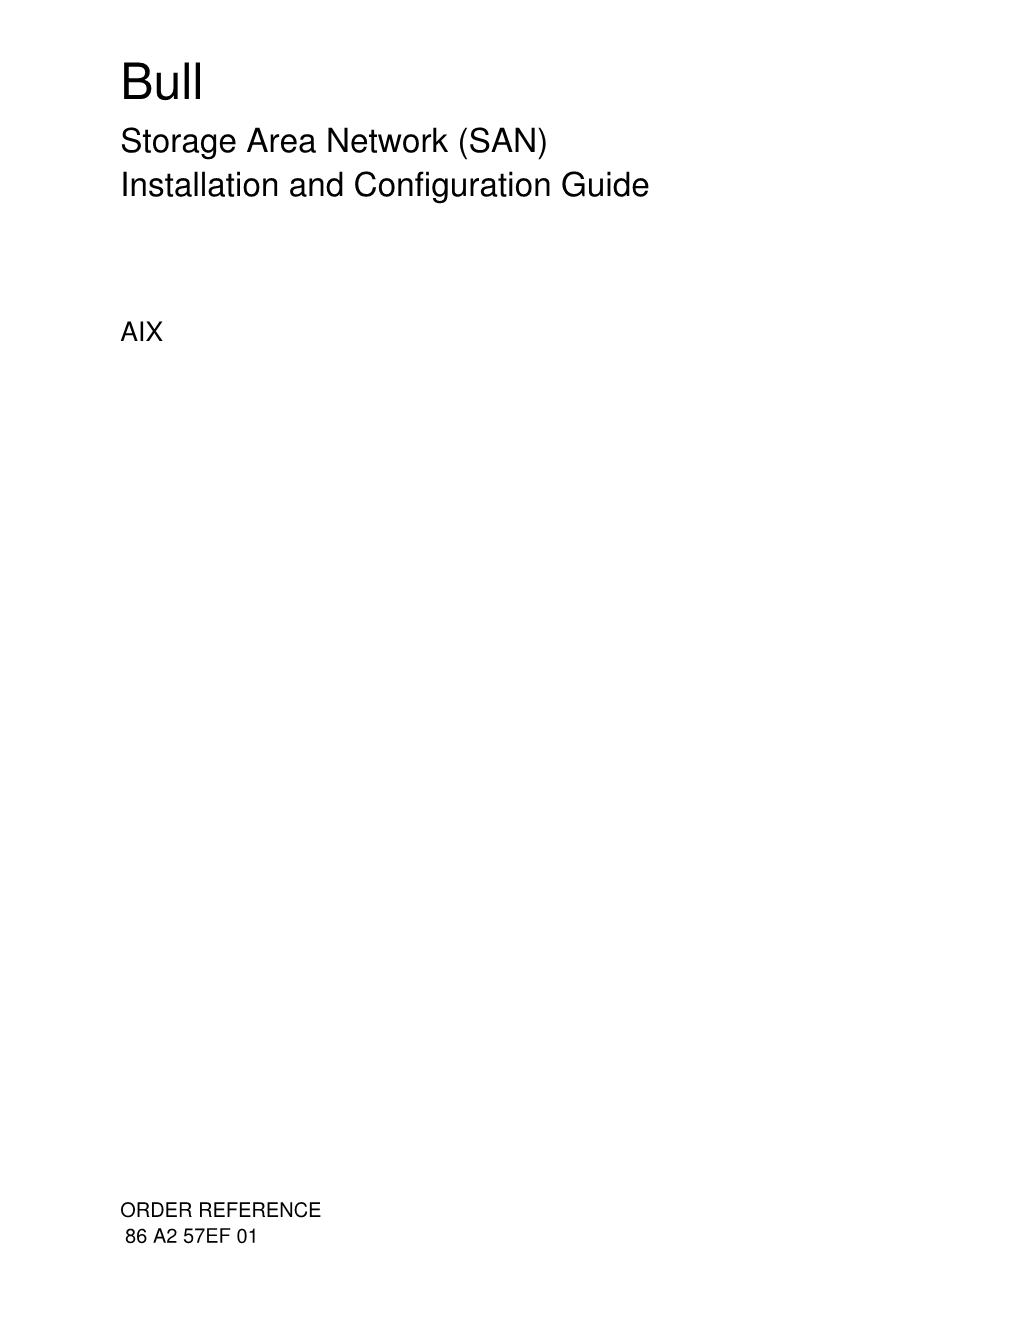 Bull Storage Area Network (SAN) Installation and Configuration Guide